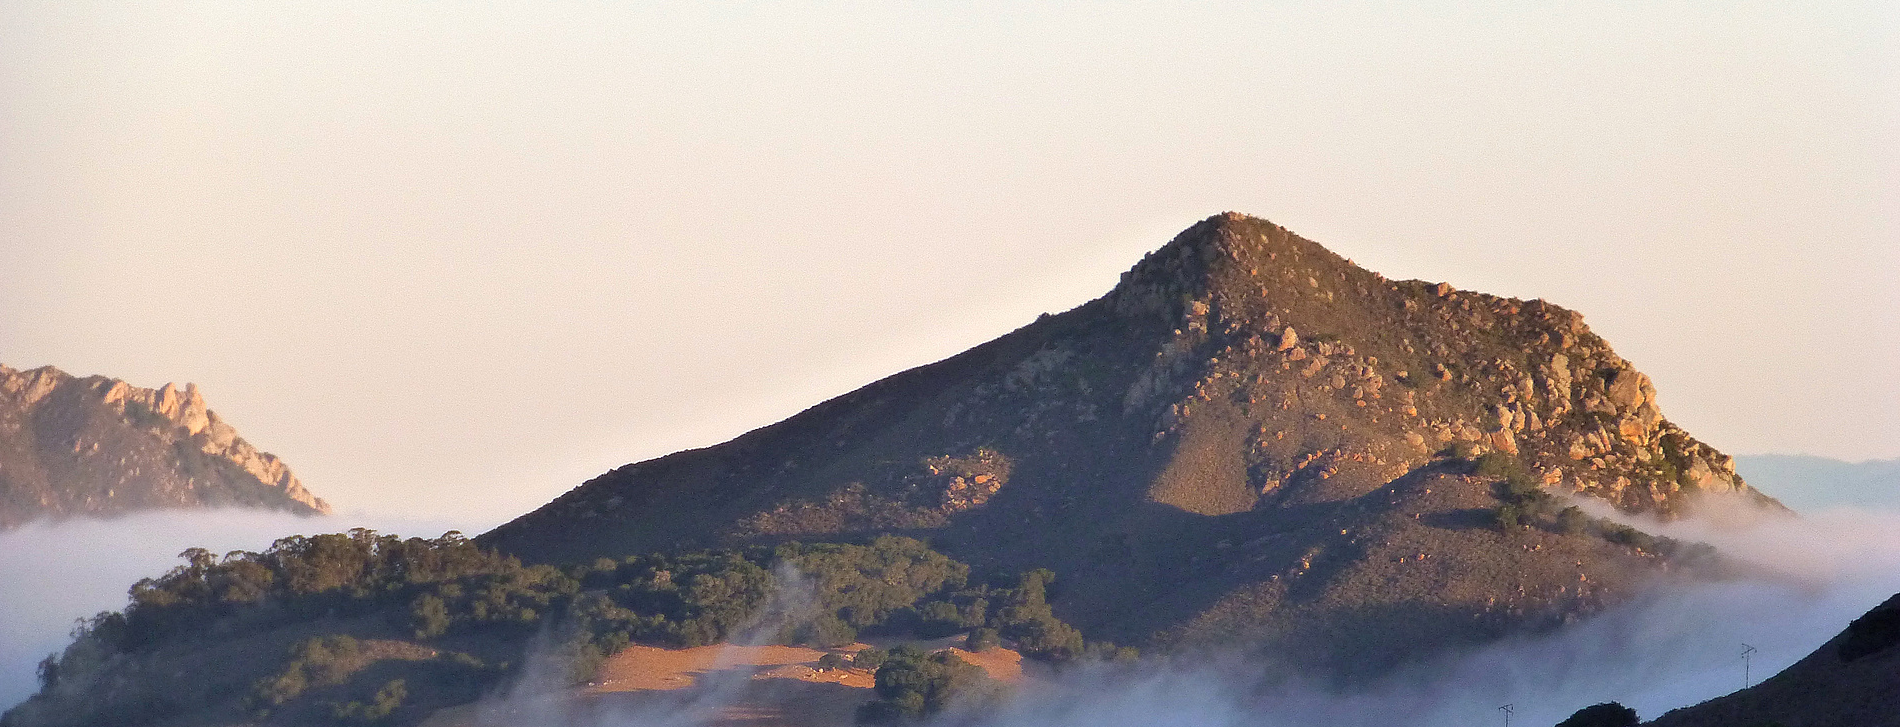 Cerro Ramauldo, one of the nine rocky peaks in San Luis Obispo County. Depicts a mountain with oak trees and large granite blocks.